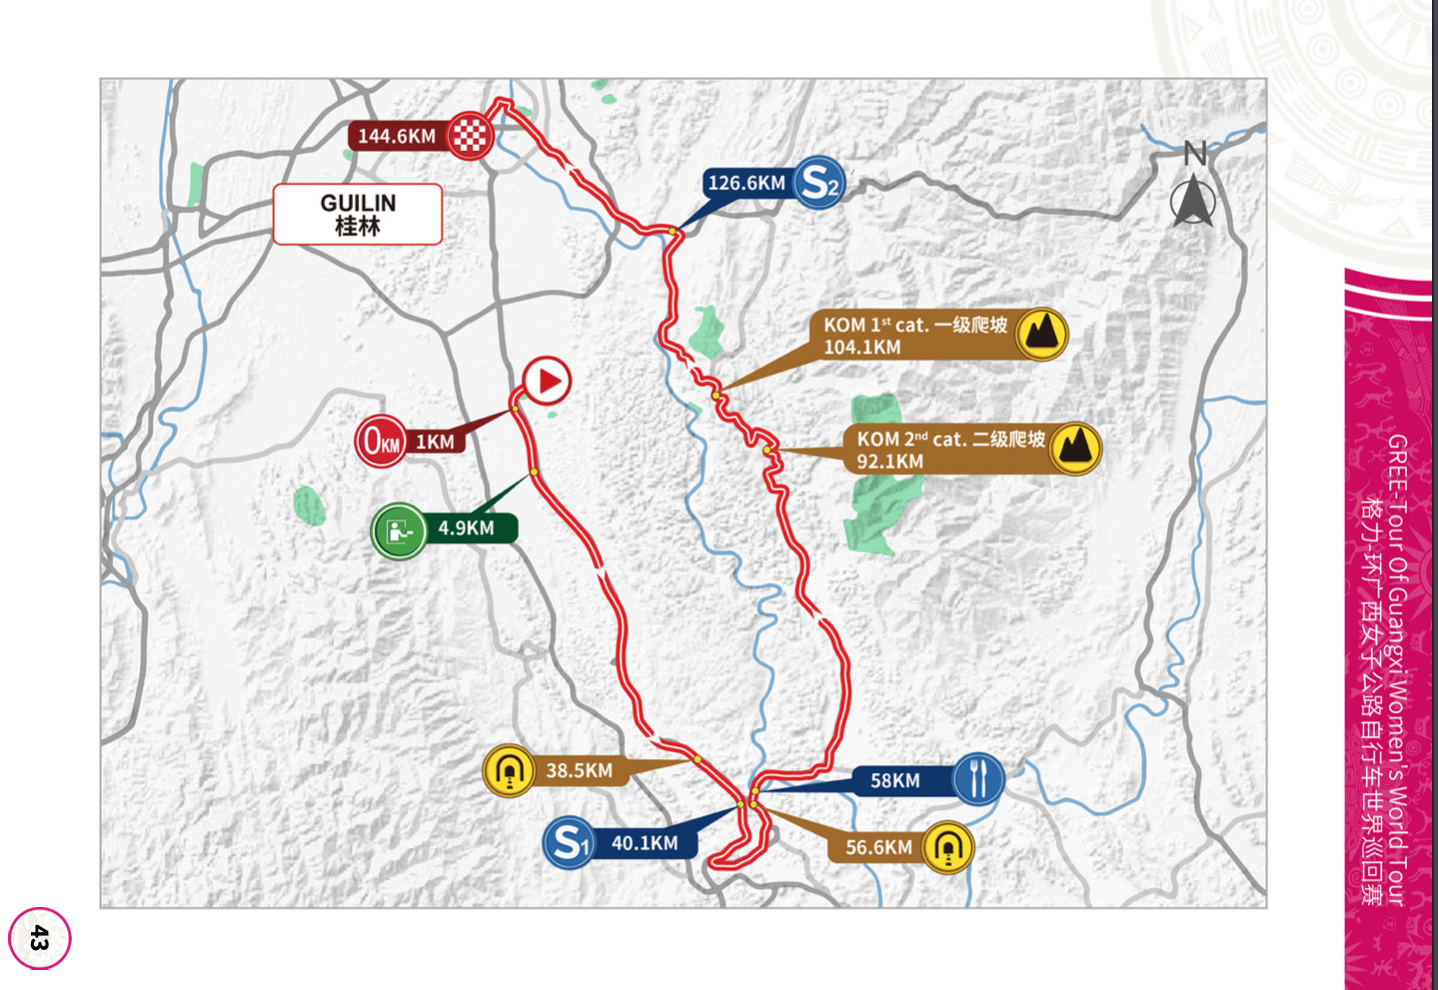 The Tour of Guangxi route, a point-to-point race that takes riders through a flatter opening section before doubling back to the finish in Guilin over two climbs.